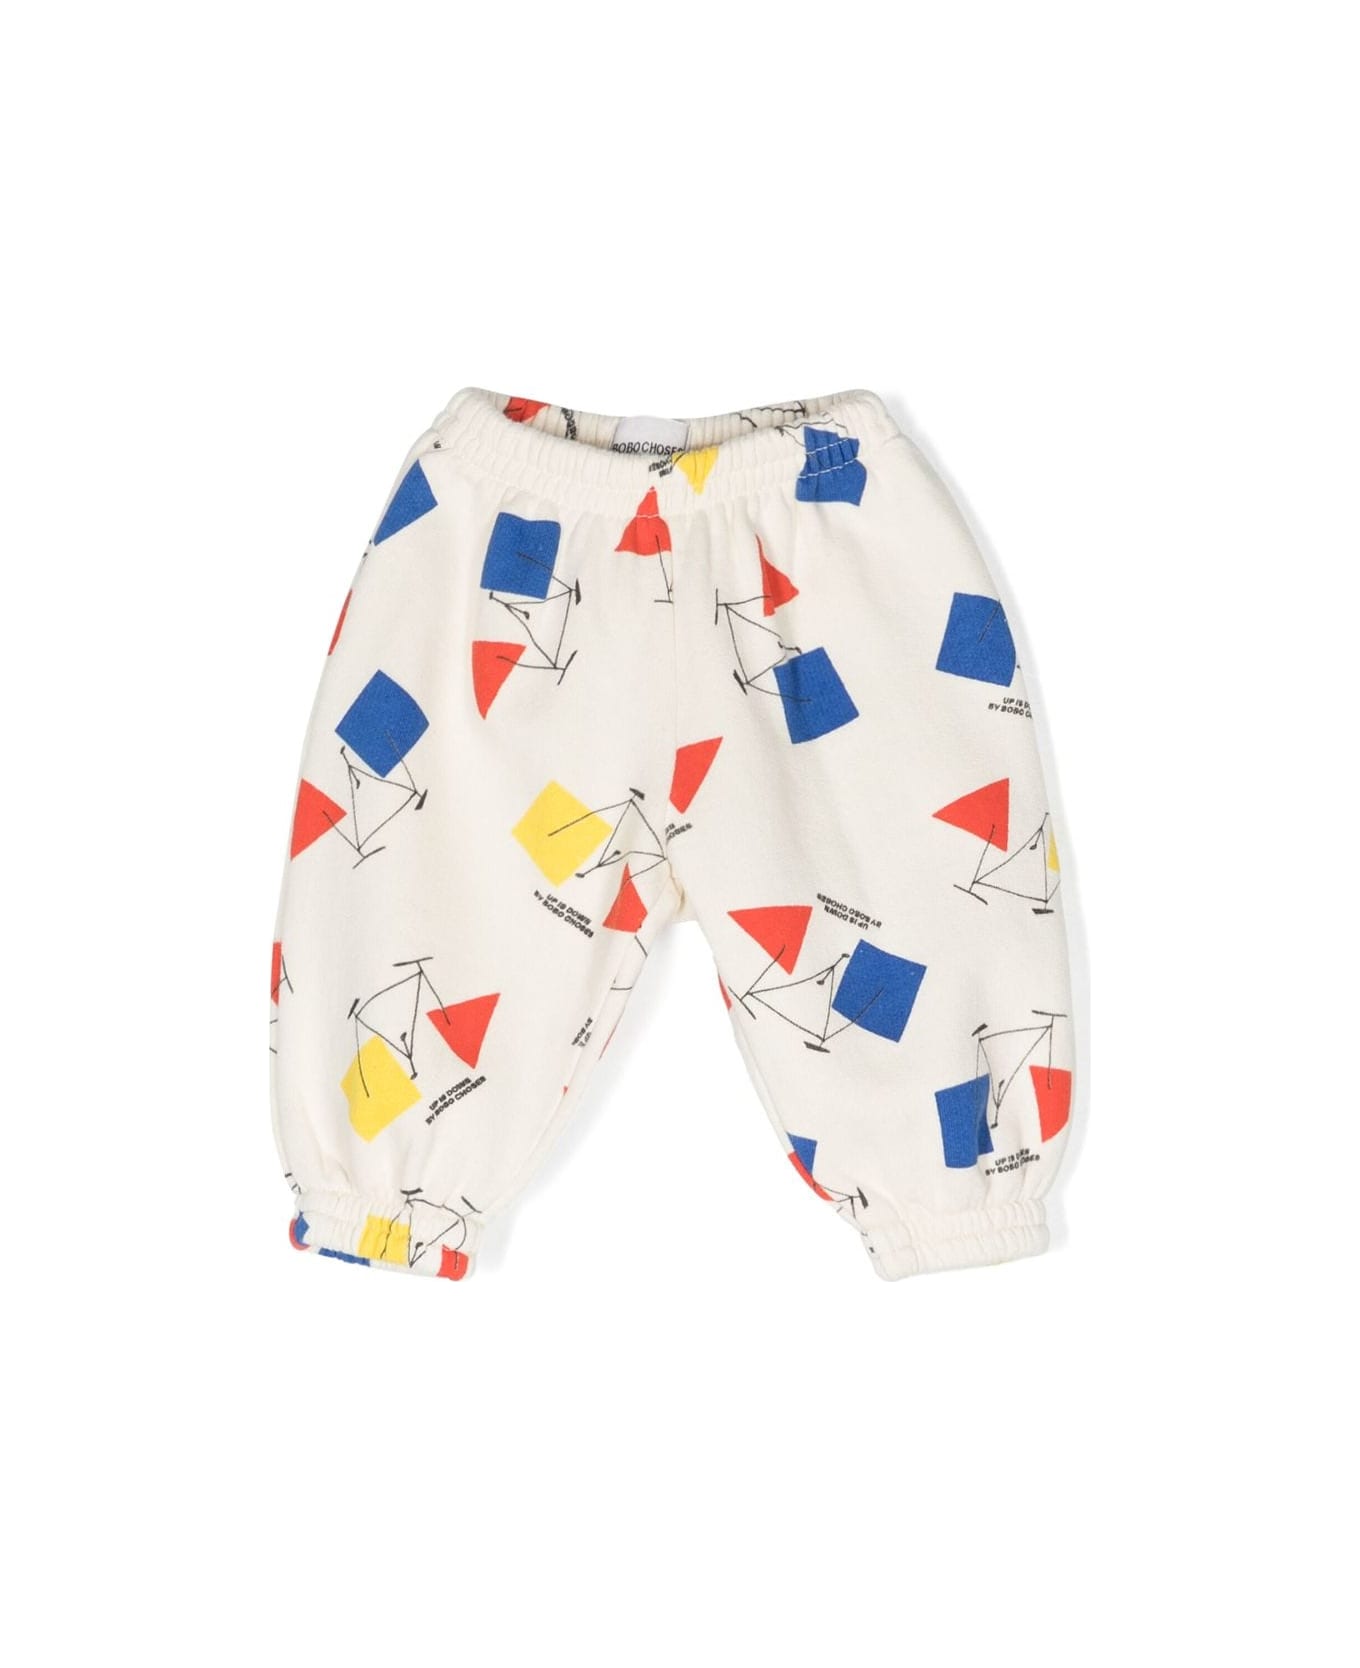 Bobo Choses Baby Crazy Bicy All Over Jogging Pants - White ボトムス